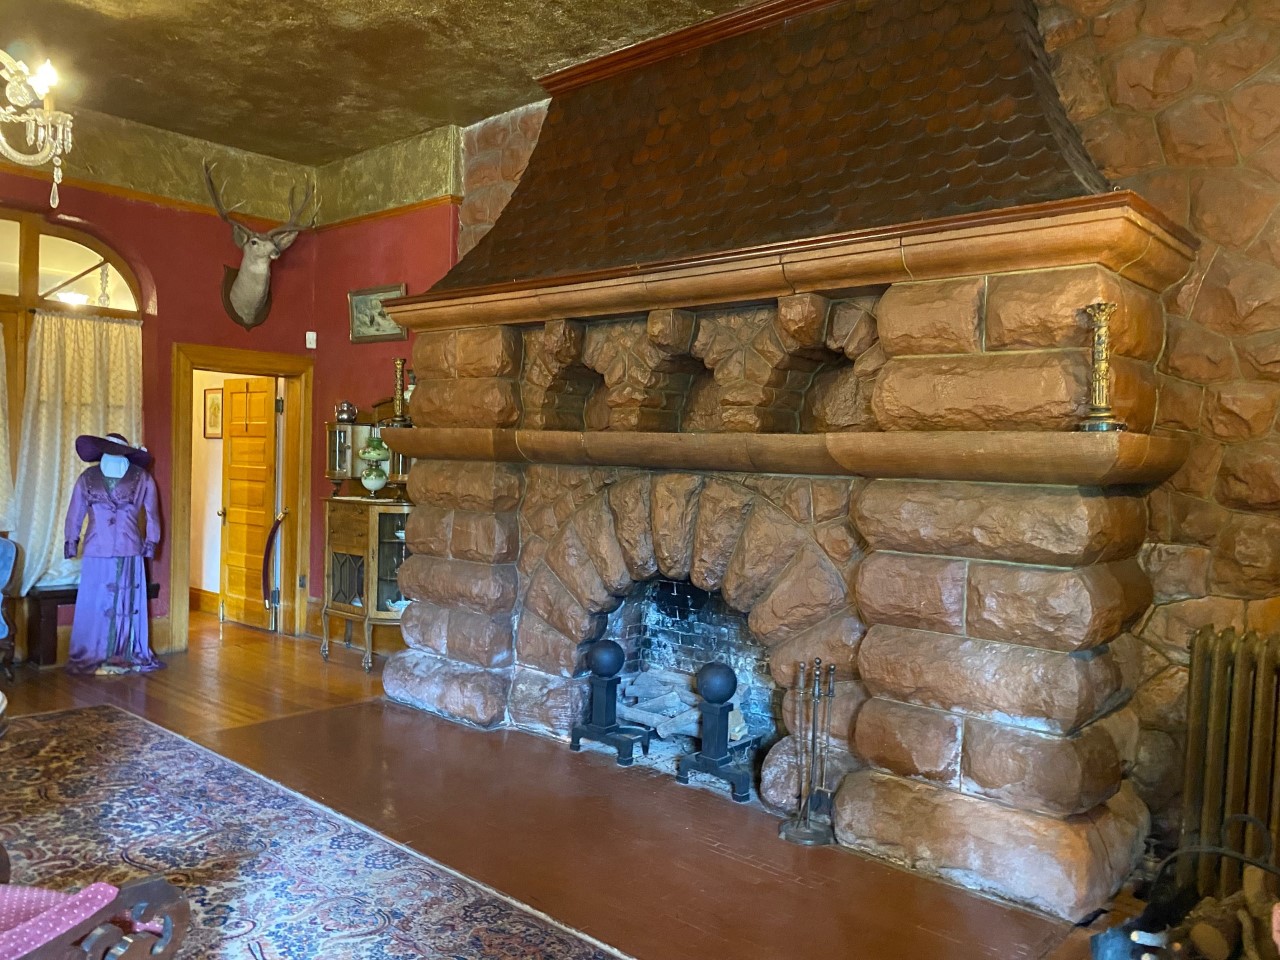 The 20-ton, red sandstone fireplace with an arched hearth